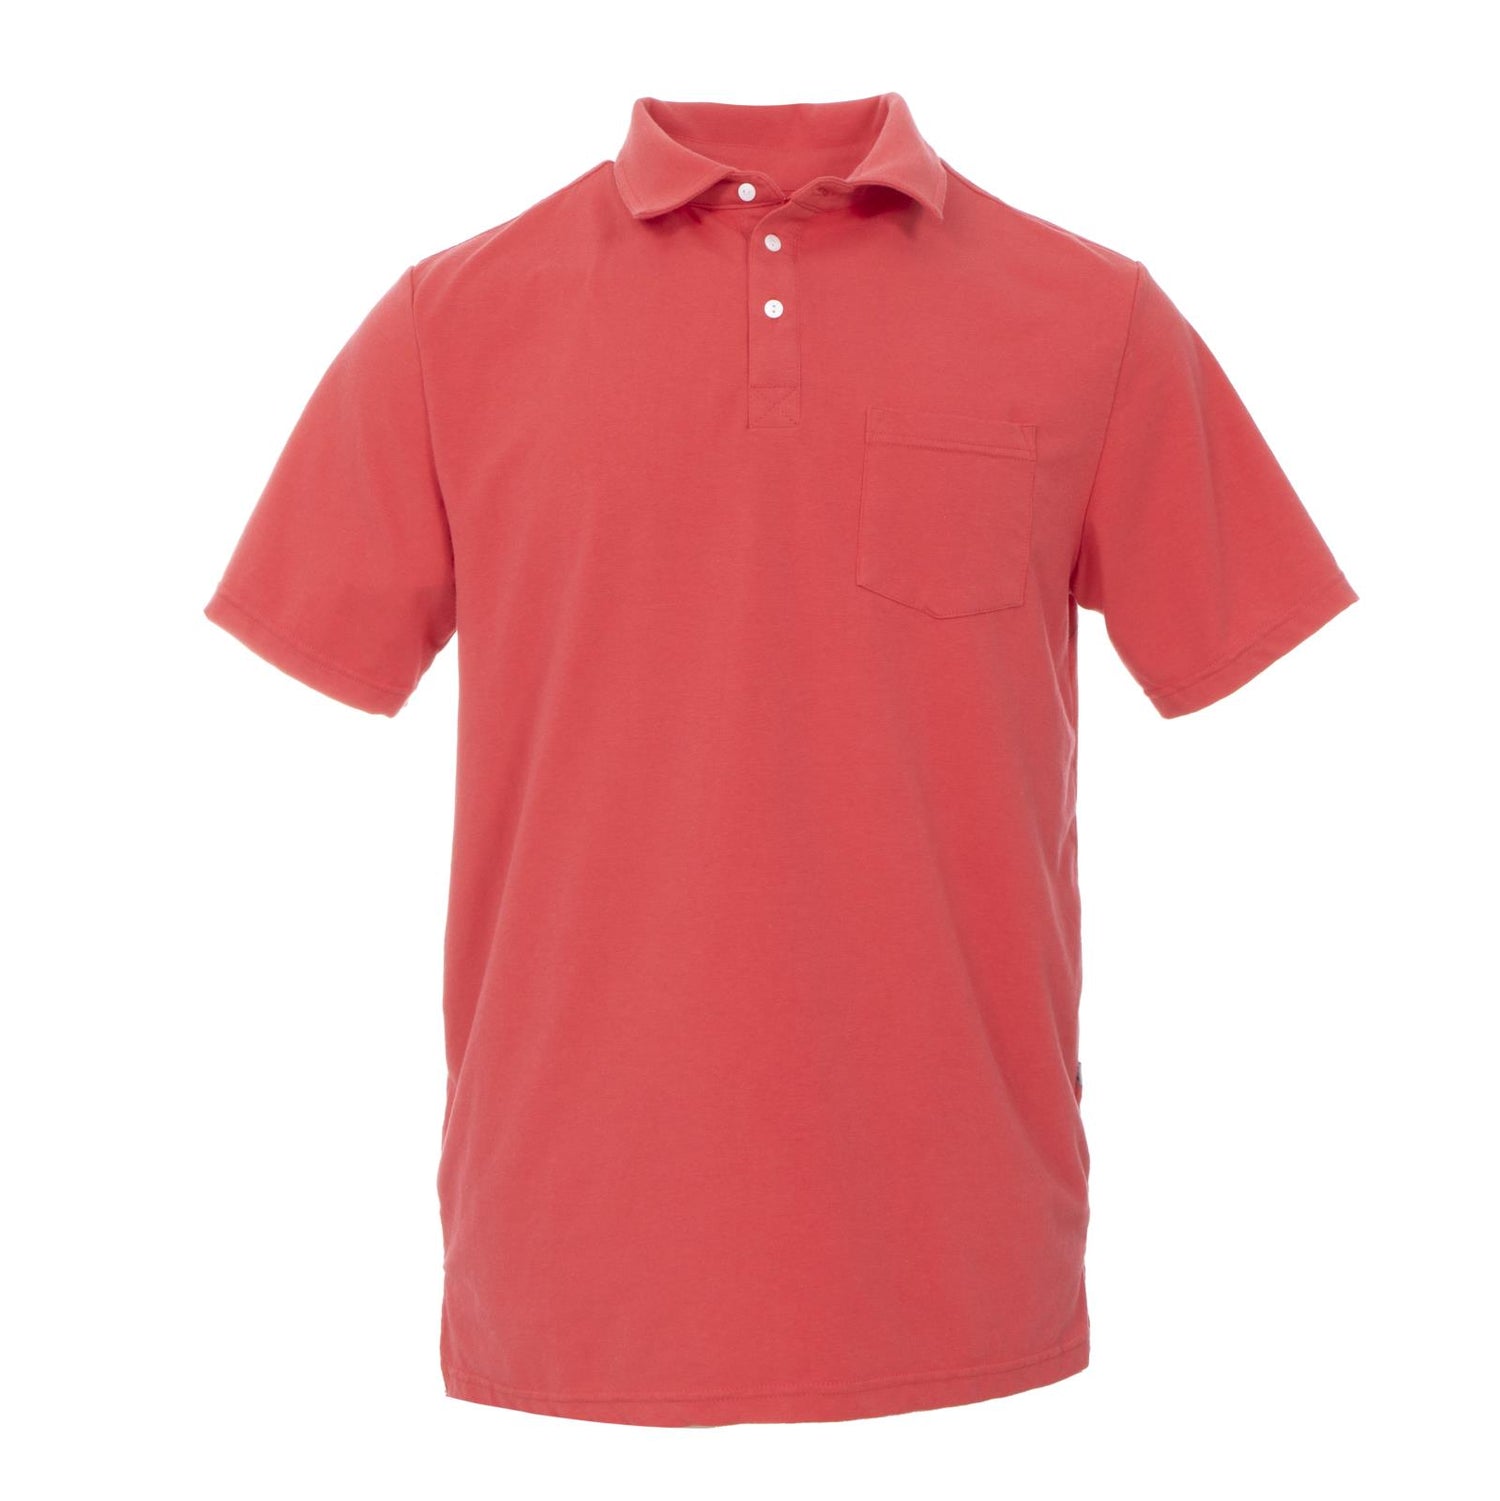 Men's Short Sleeve Luxe Jersey Polo in Red Ginger